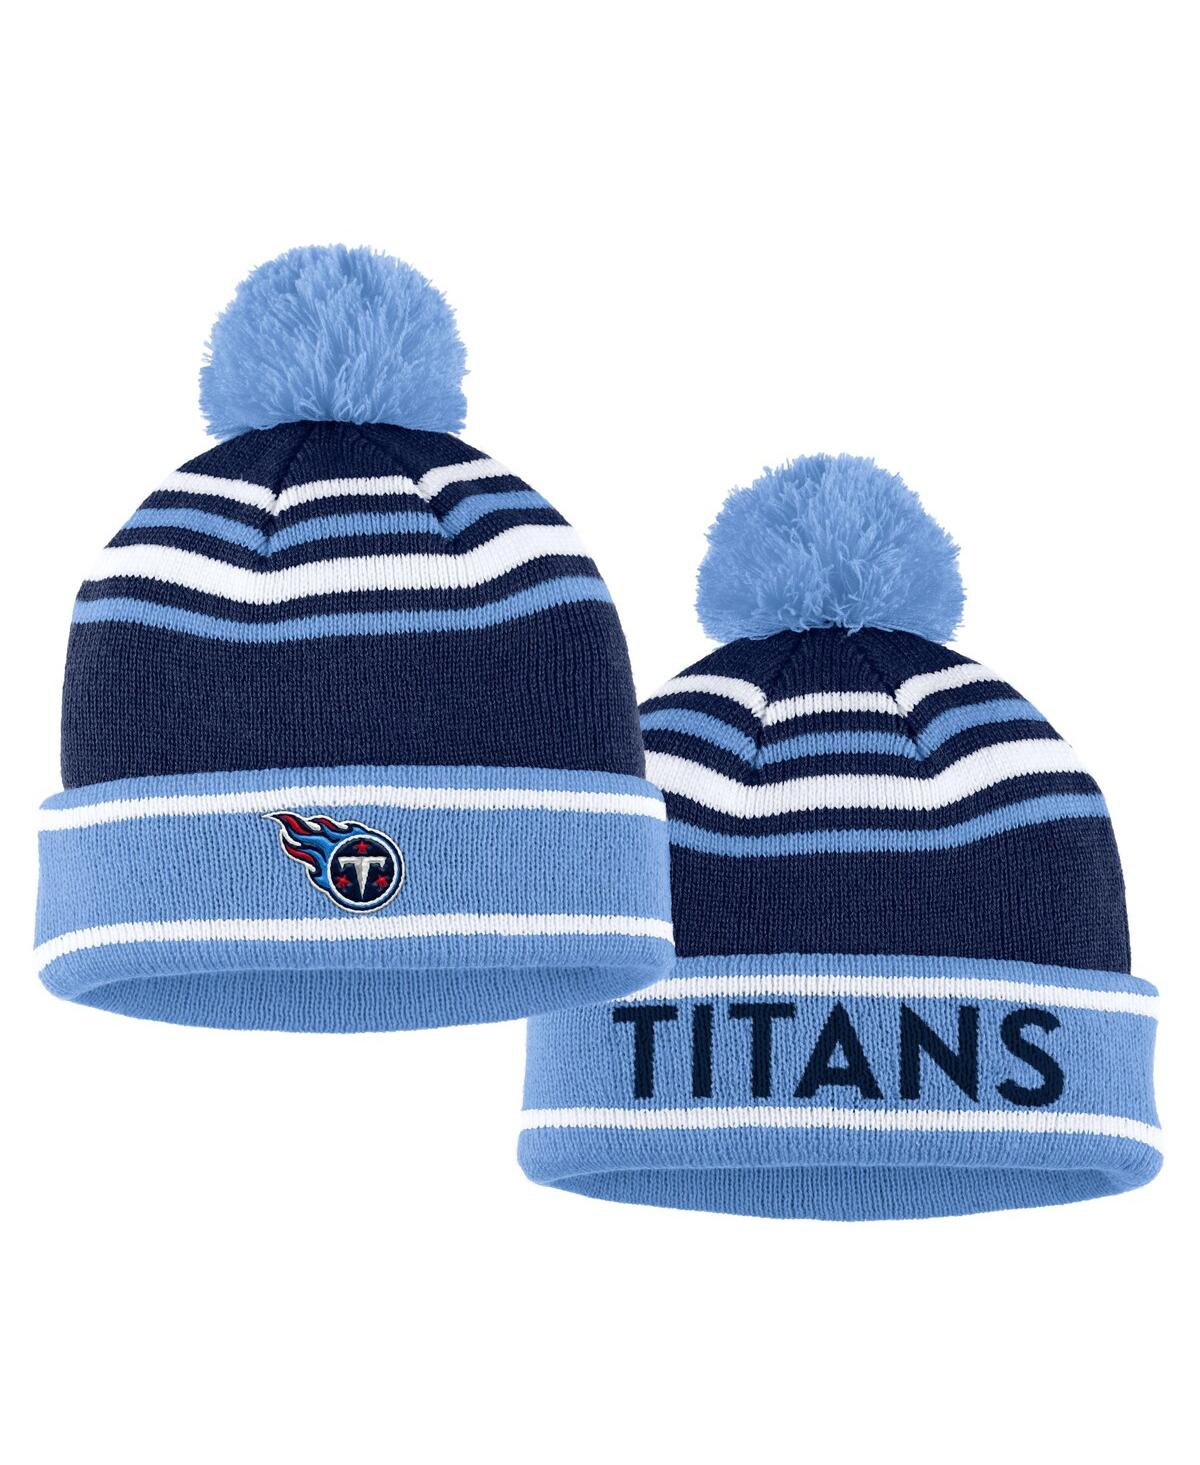 Shop Wear By Erin Andrews Women's  Navy Tennessee Titans Colorblock Cuffed Knit Hat With Pom And Scarf Set